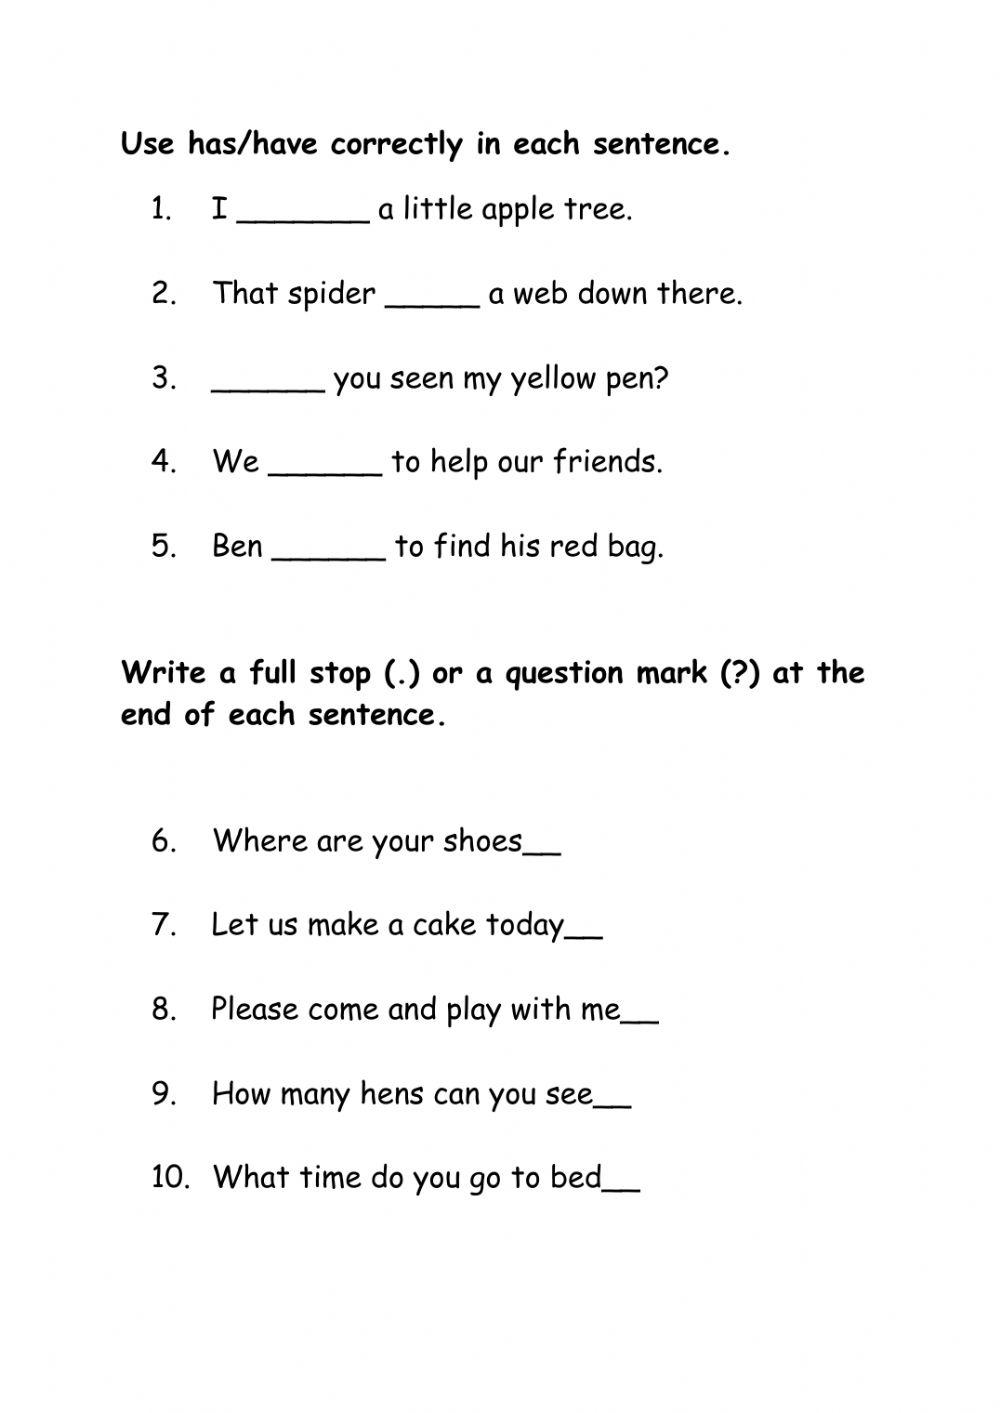 Using has-have and punctuation marks